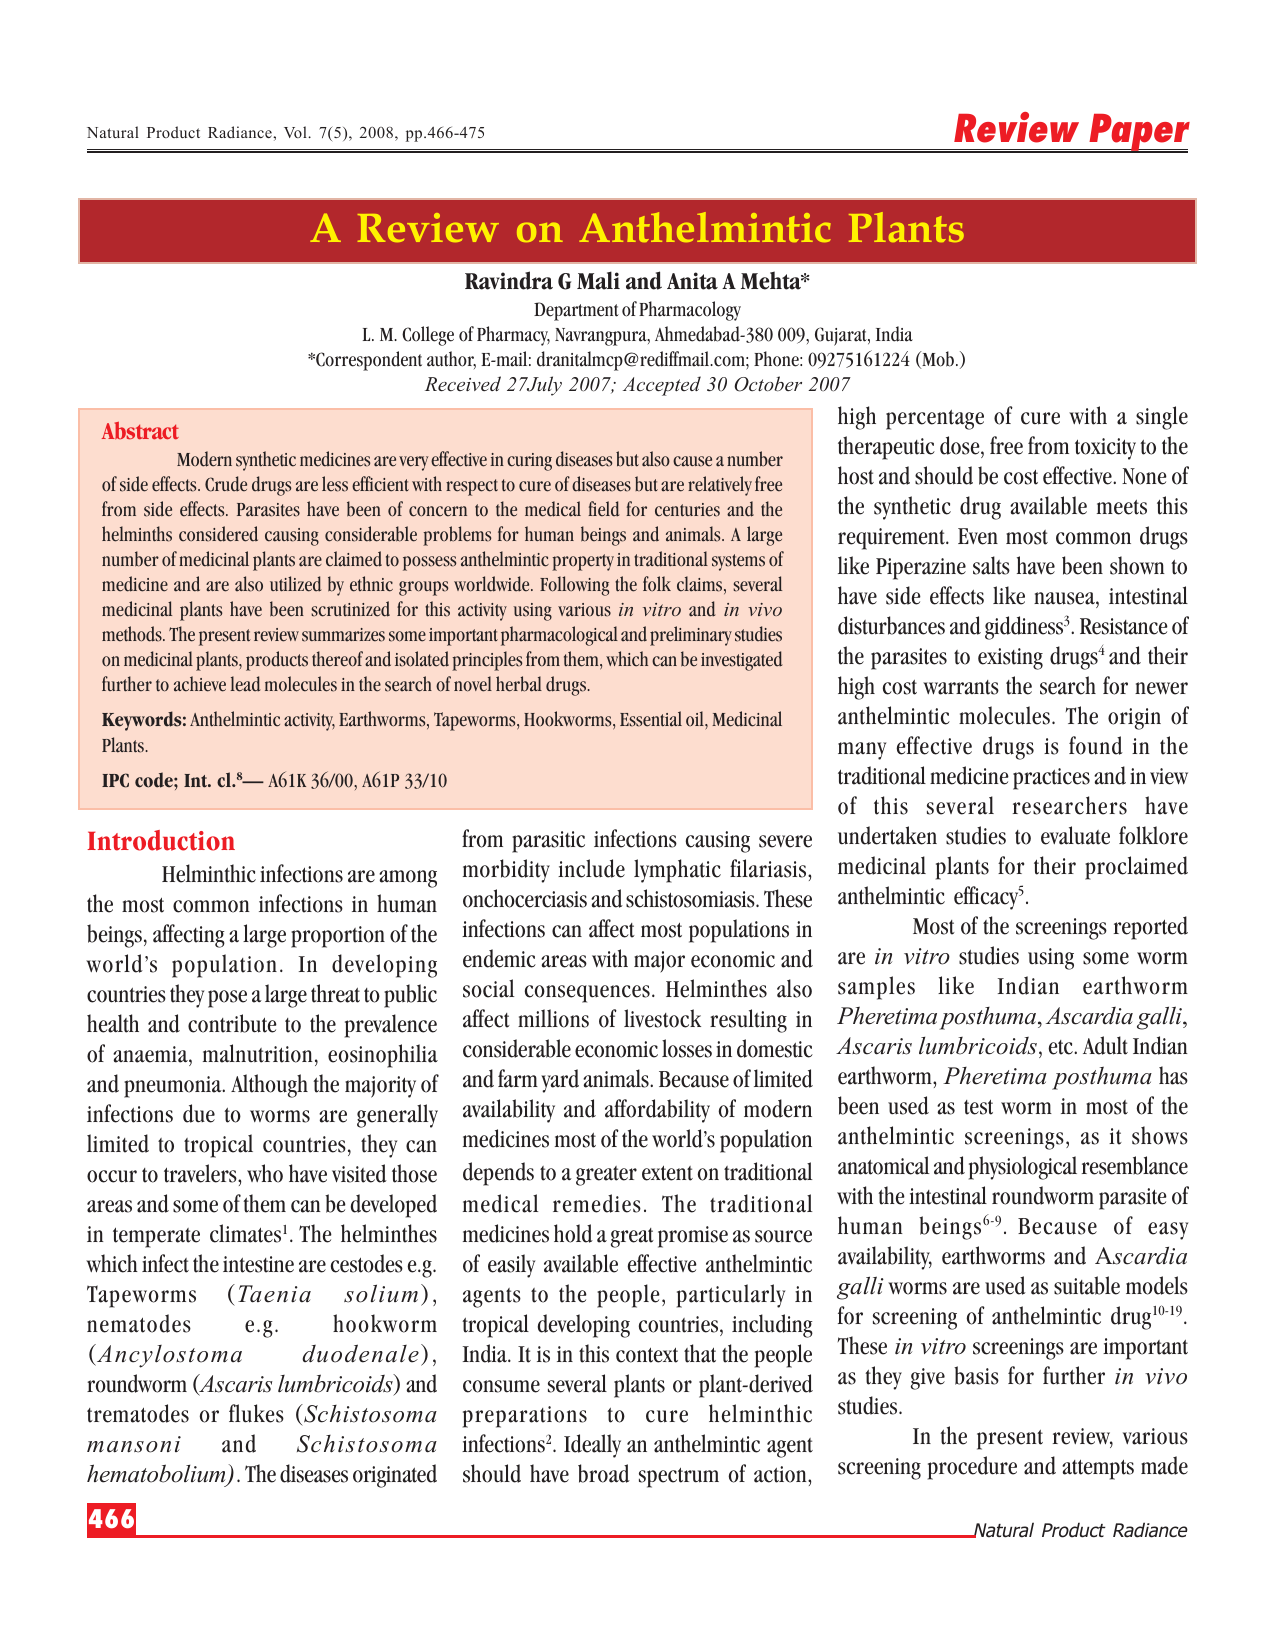 anthelmintic review)